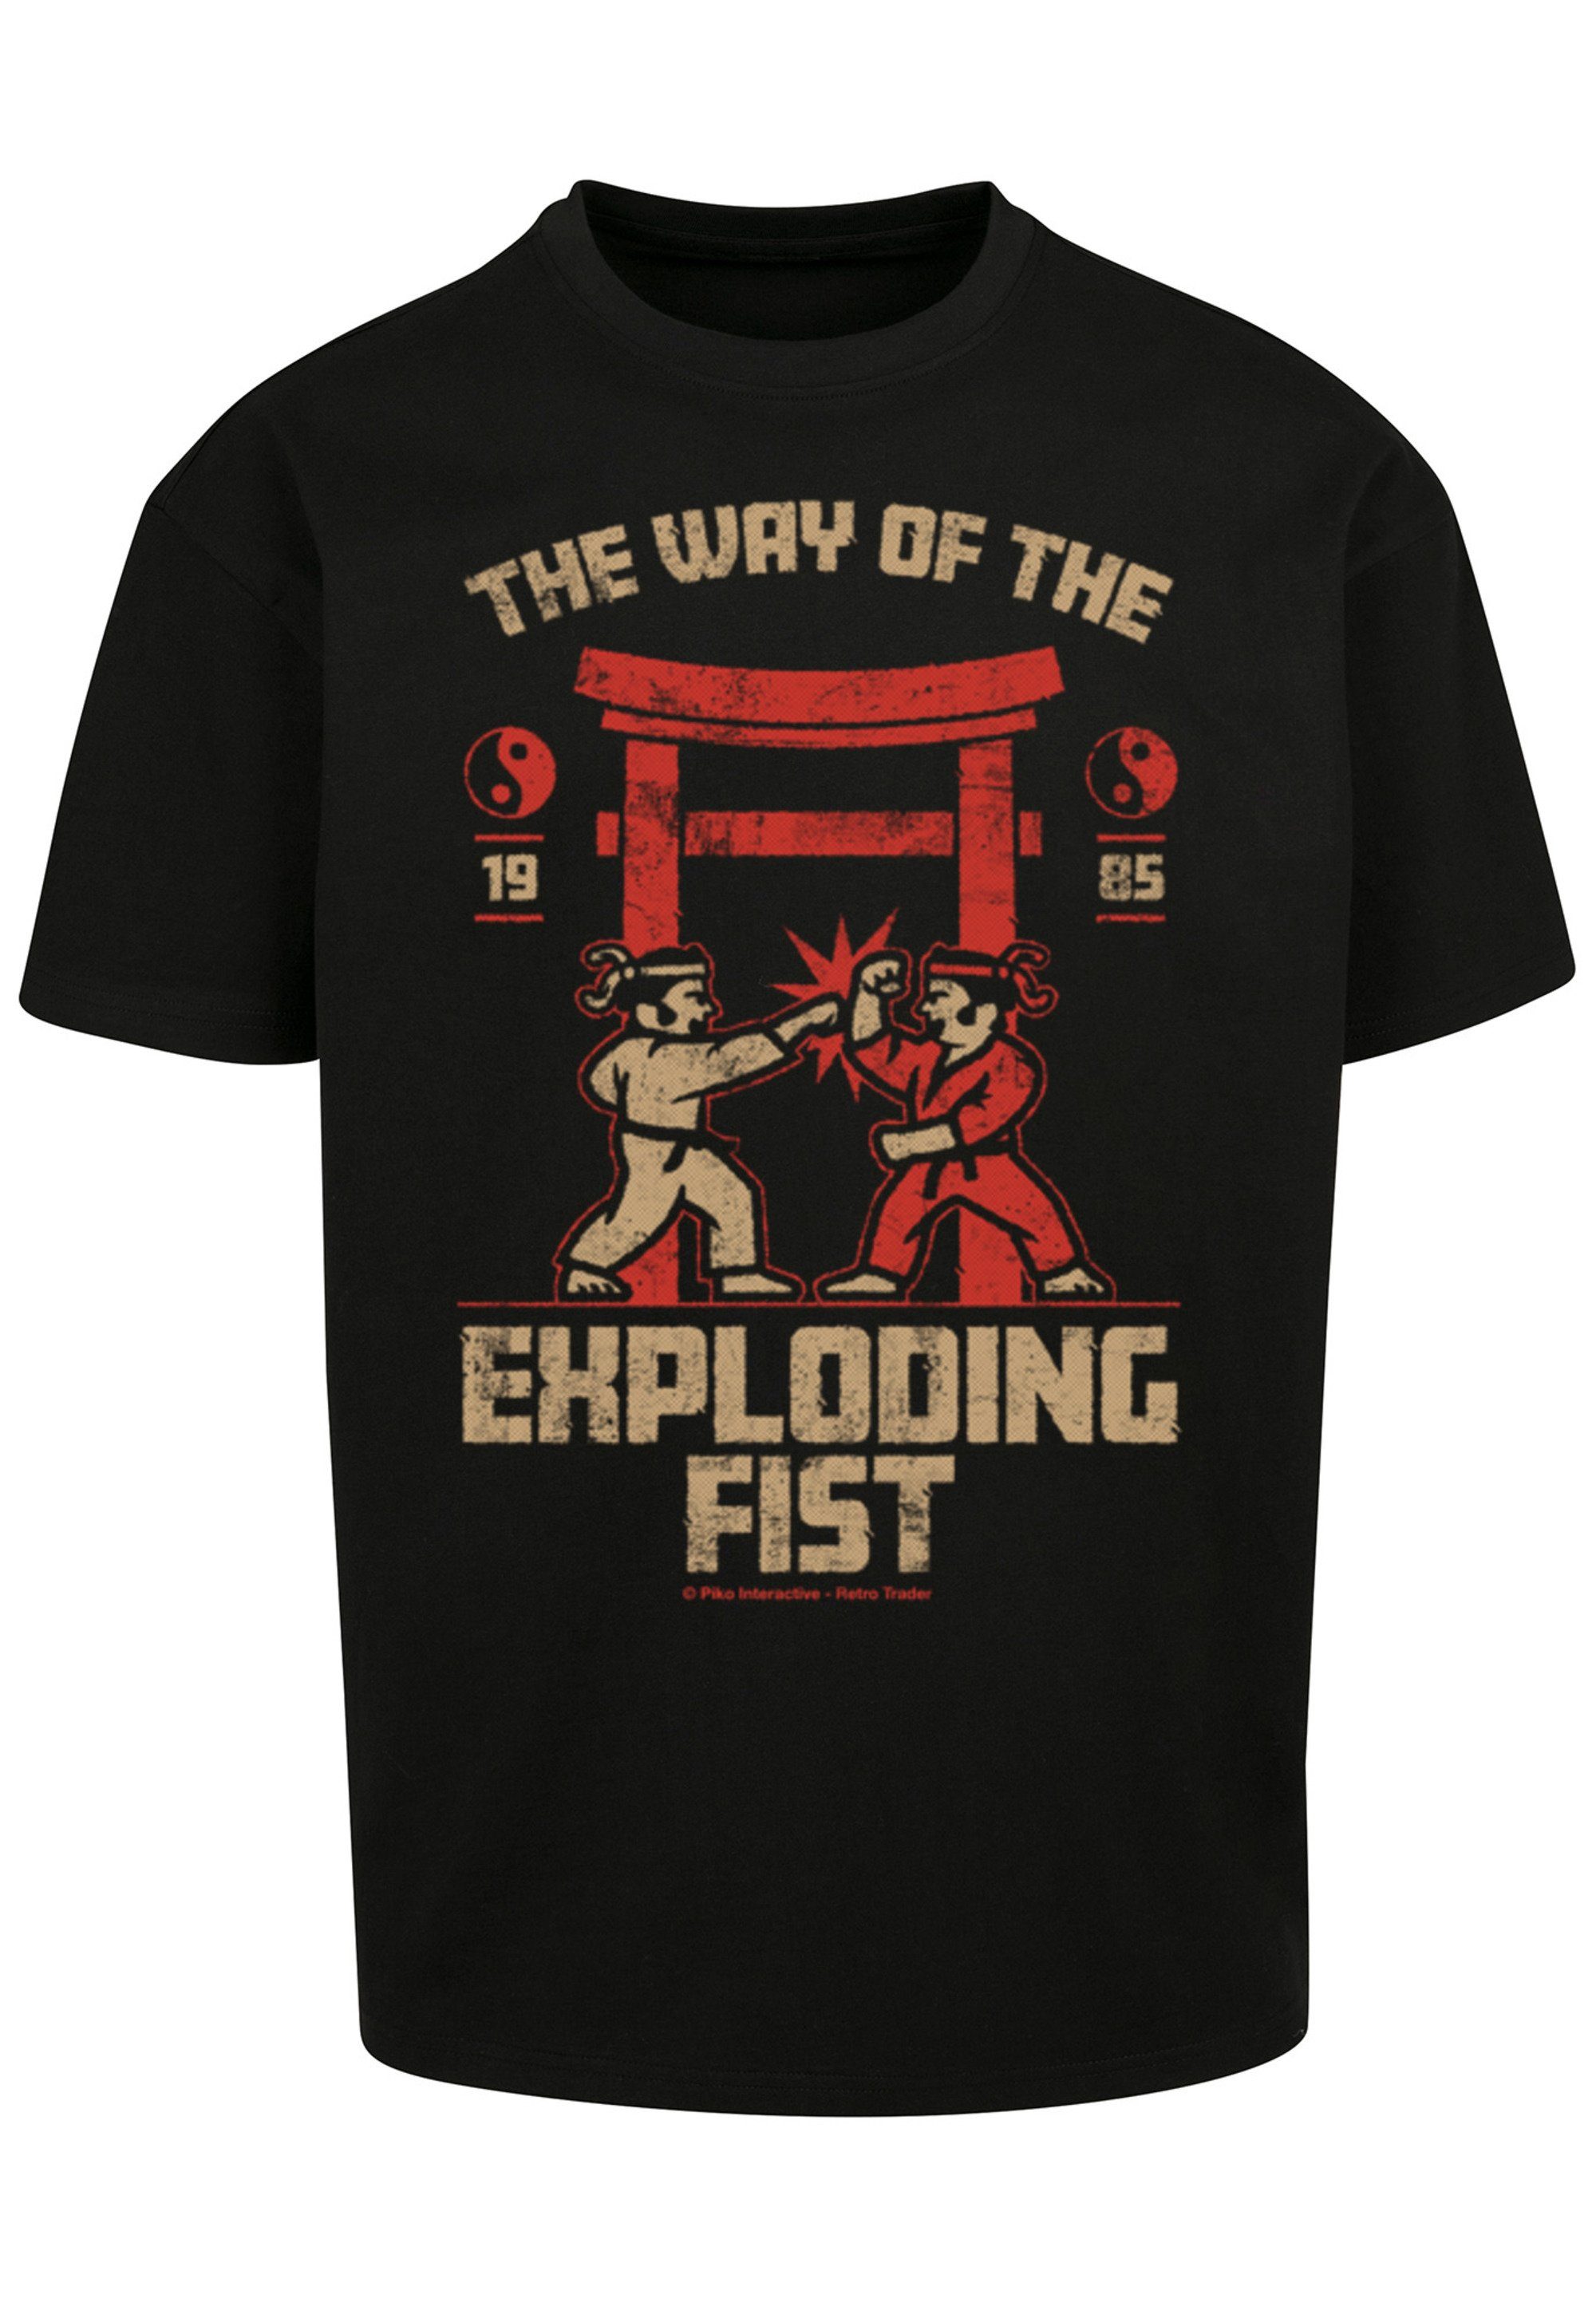 F4NT4STIC T-Shirt The Way Of Retro SEVENSQUARED Gaming schwarz Exploding Print The Fist